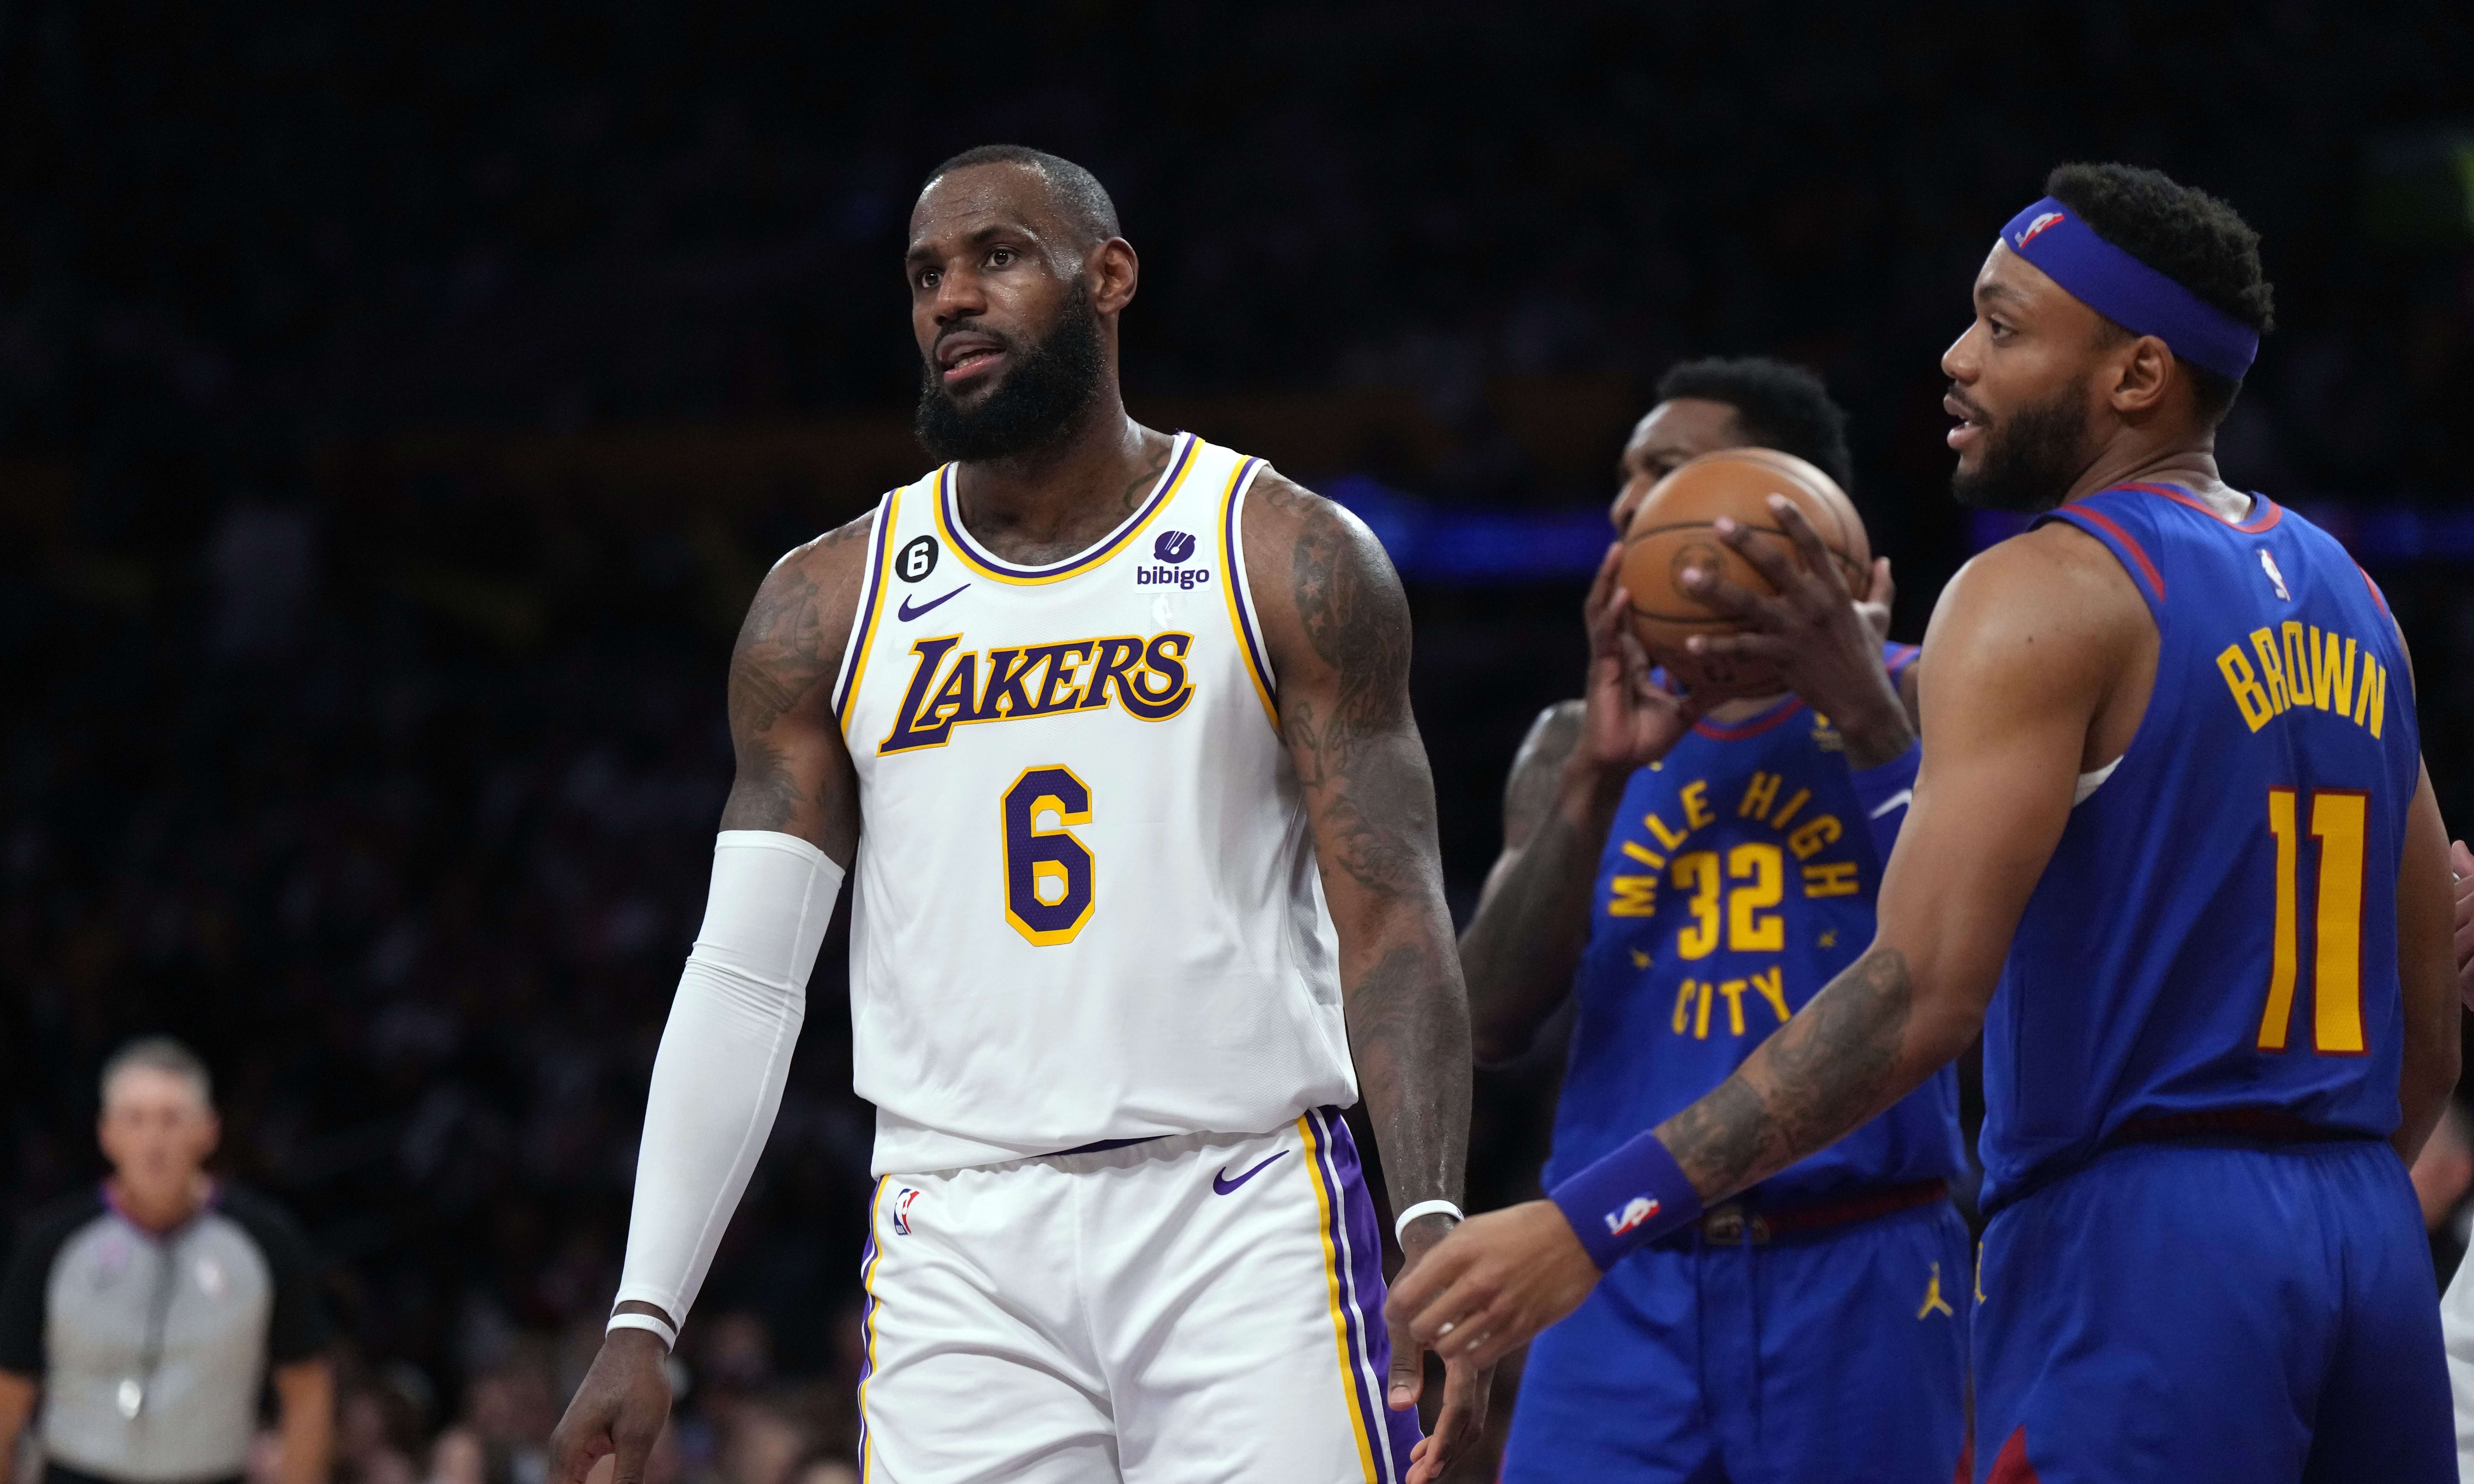 Stephen A. Smith once told Rich Paul that LeBron James isn’t the GOAT